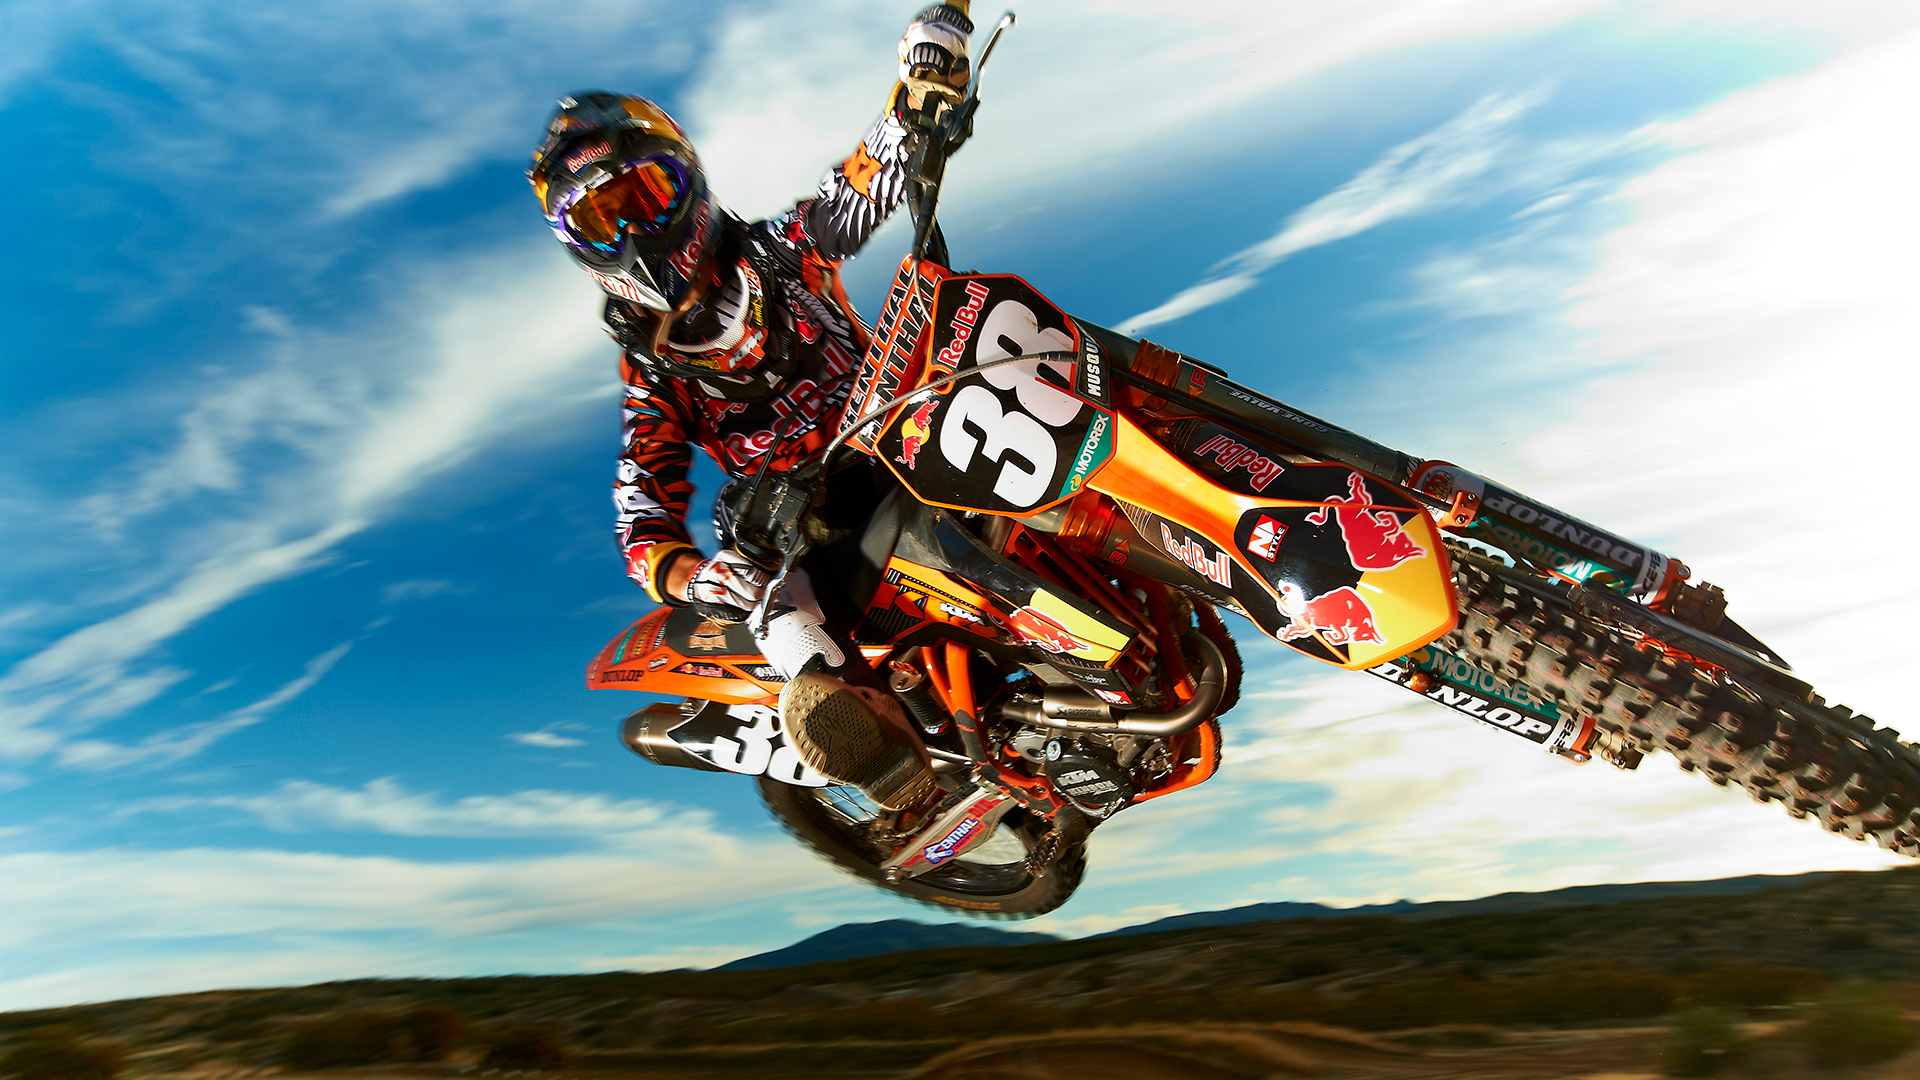 Dirt Bike Wallpaper 4K / 10 New Ktm Dirt Bike Wallpapers FULL HD 1080p For PC ... / Support us by sharing the content, upvoting wallpapers on the page or sending your own background pictures.